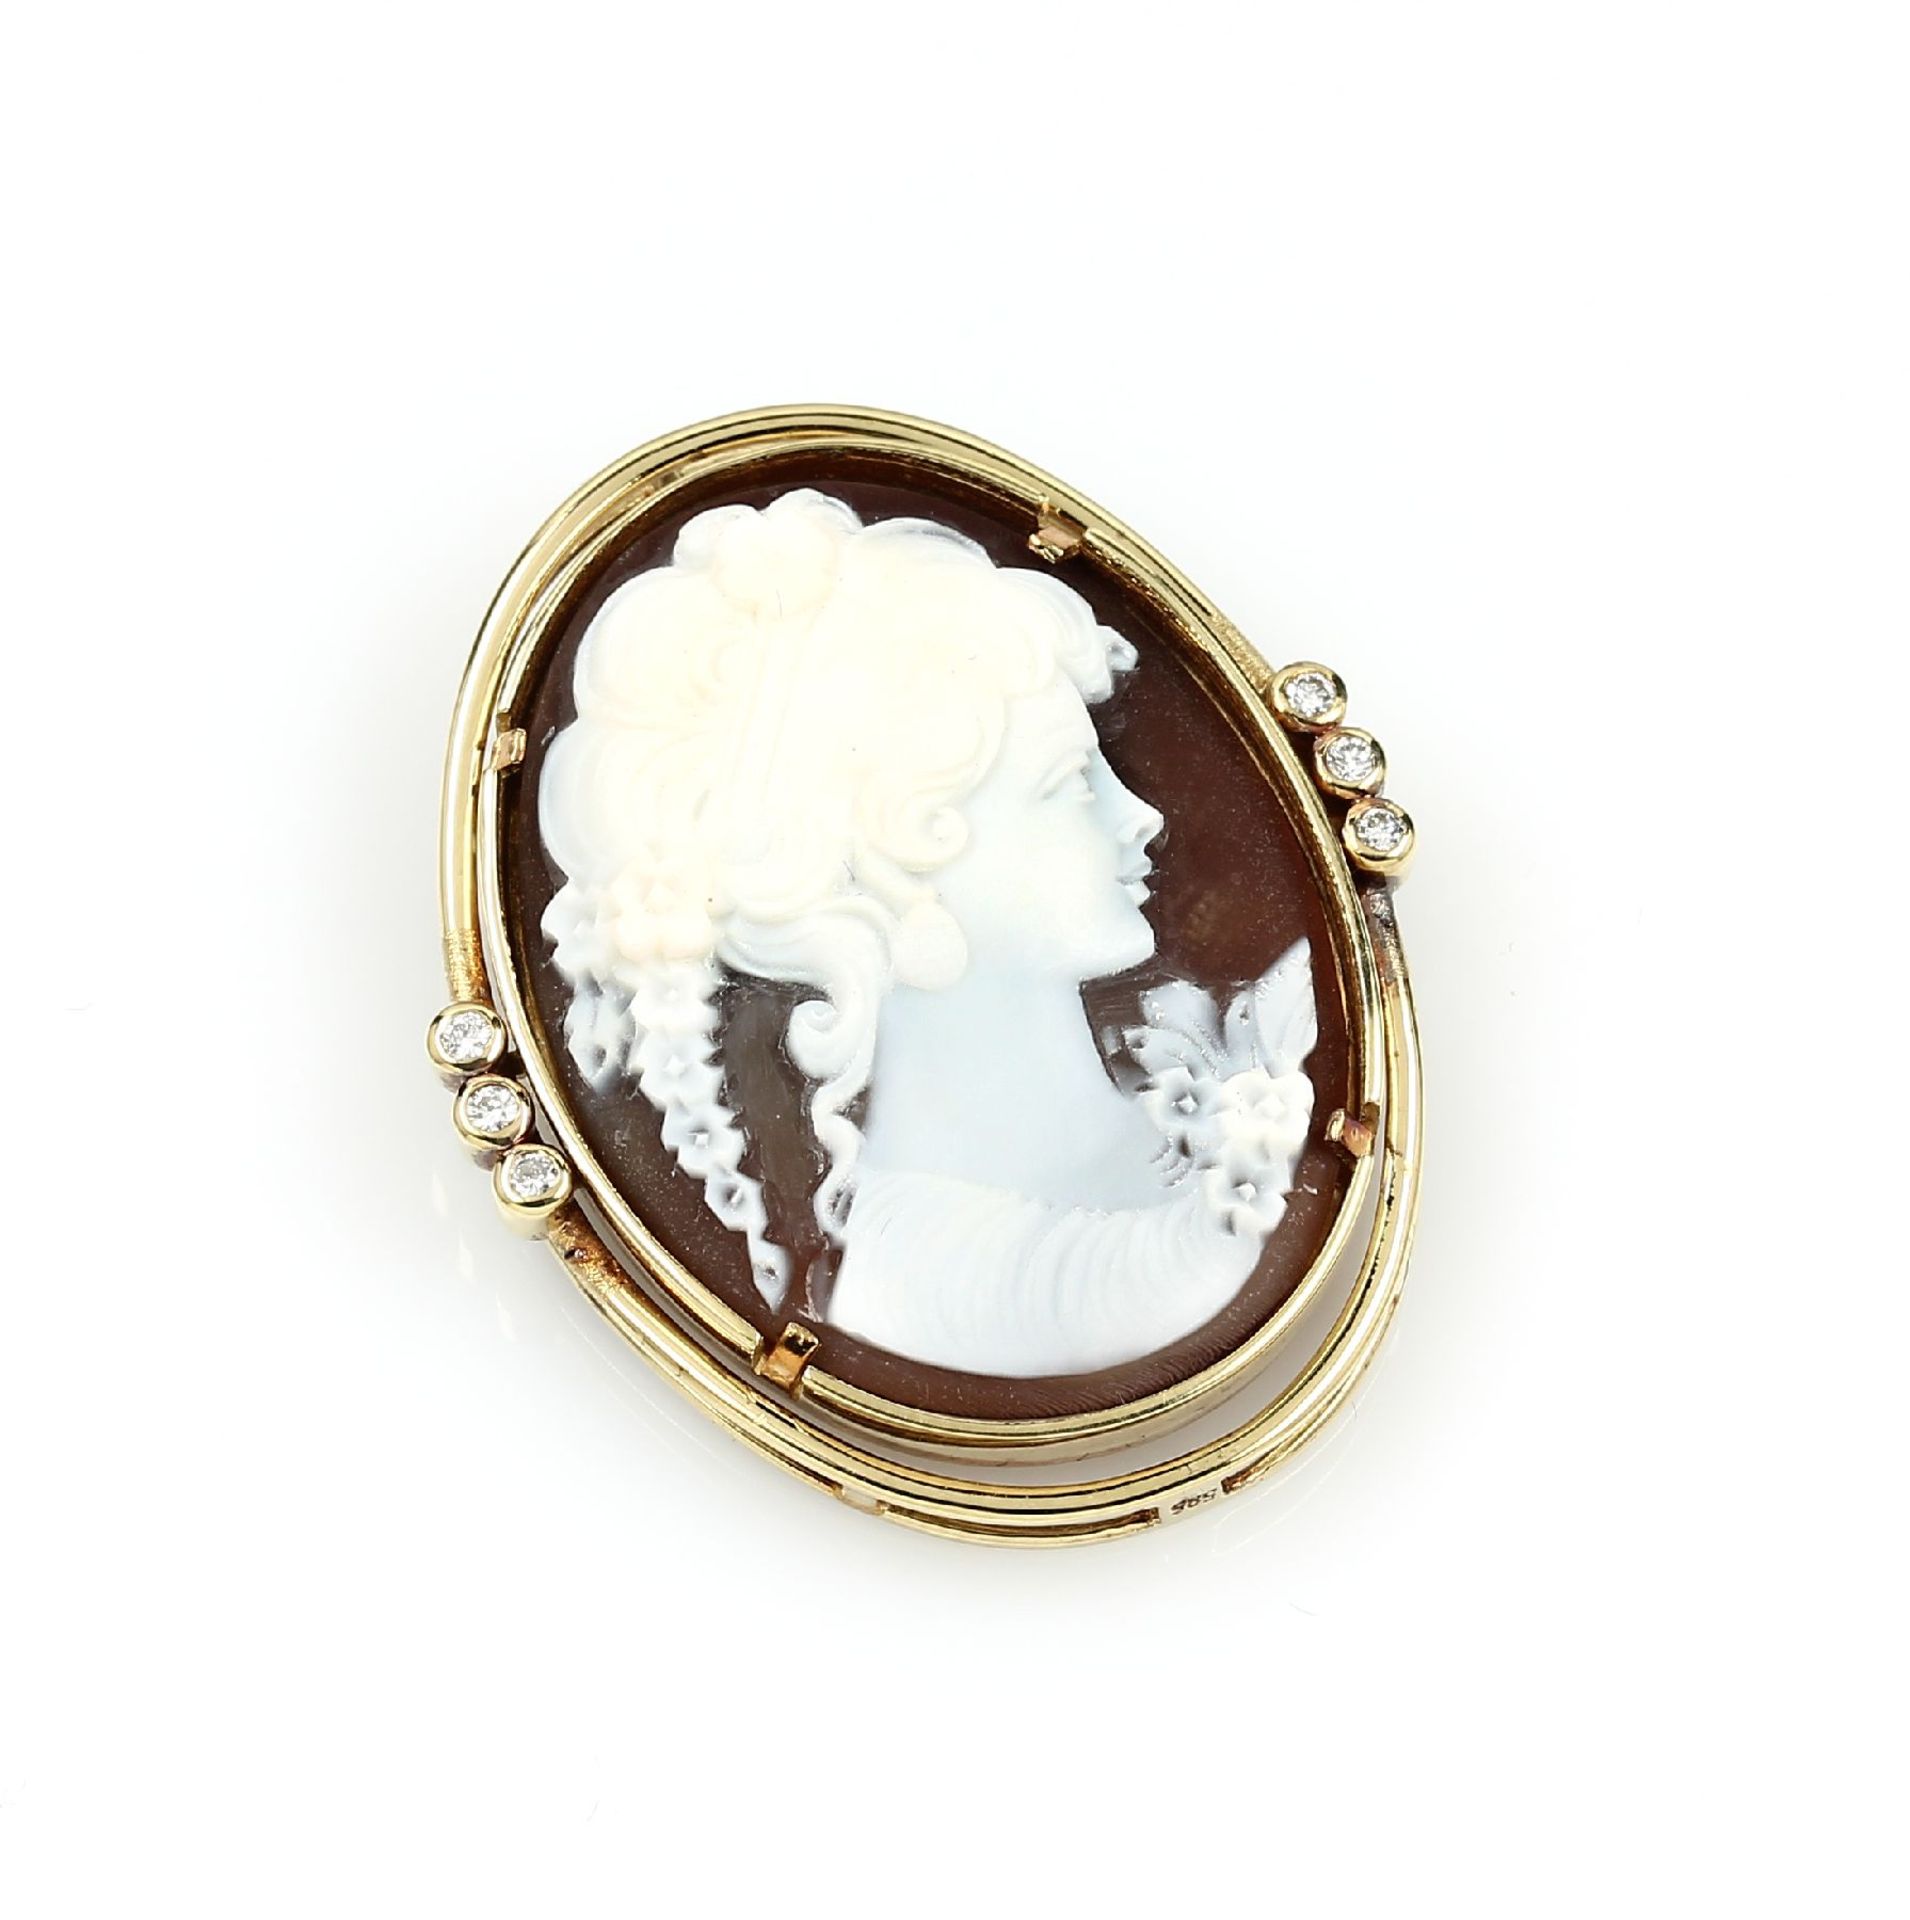 Brooch with shell cameo and brilliants , YG 585/000, 6 brilliants total approx. 0.18 ct Wesselton/